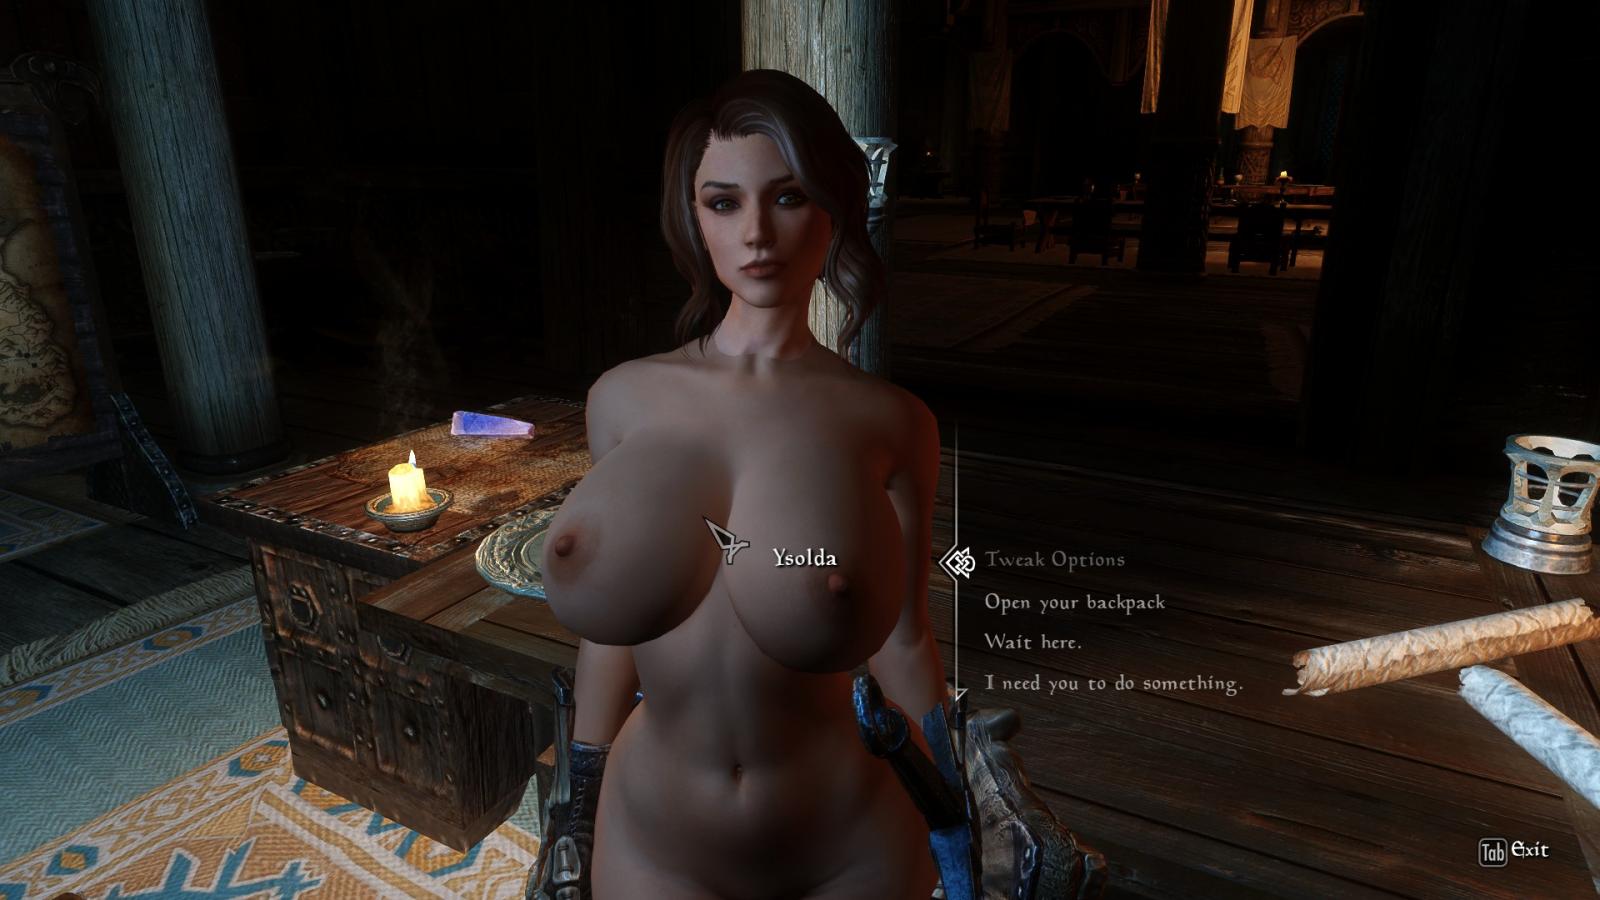 Enb issue or did you replace skin textures improperly? 